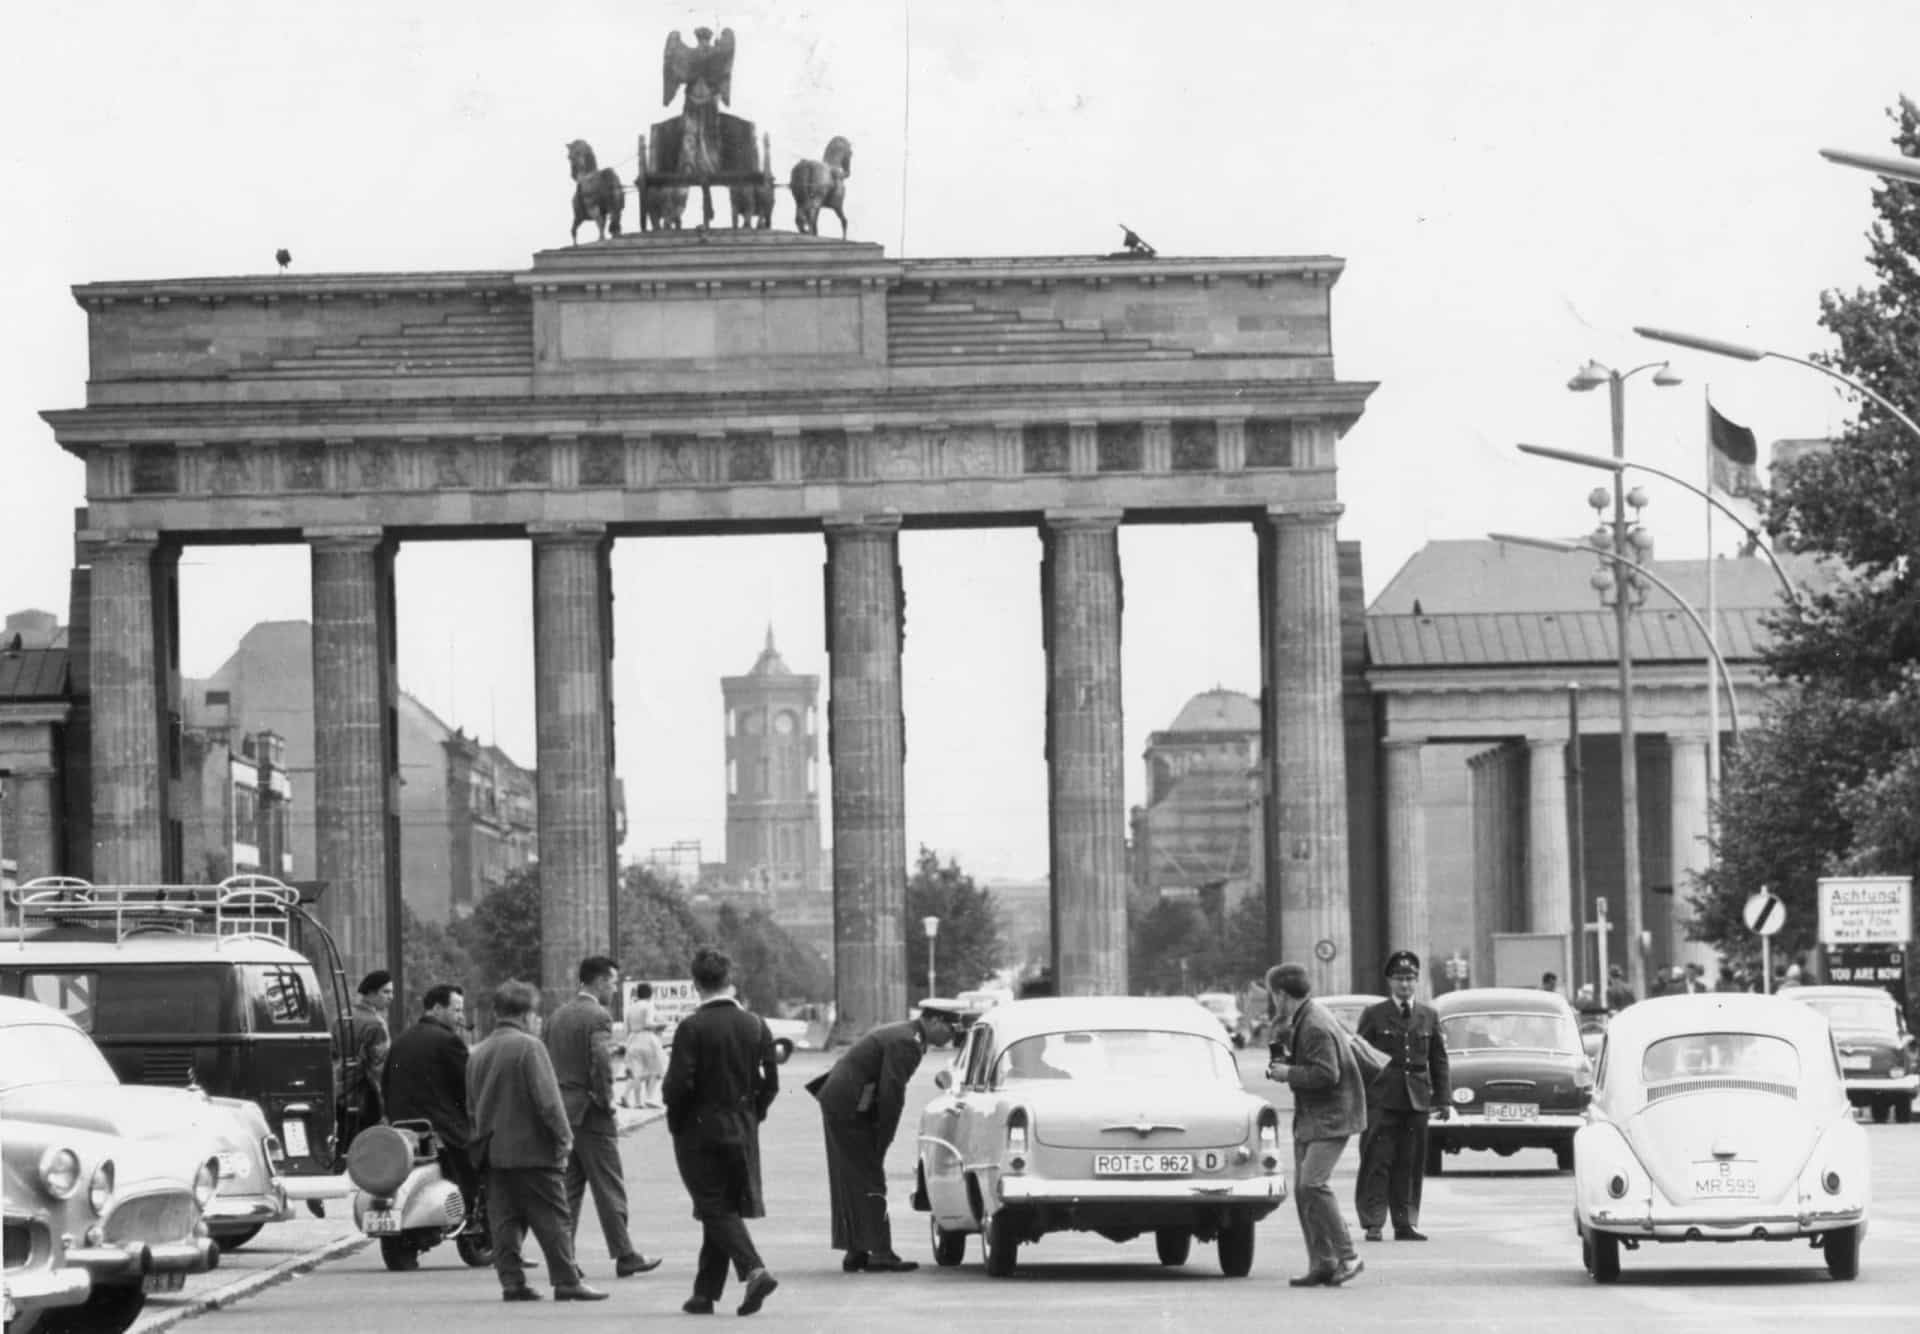 <p>Pictured: West Berlin police officers, pictured here on August 21, 1960, speak to motorists before they cross under the Brandenburg Gate into East Berlin. Approximately one year later, the landmark gate, which was to form part of the Berlin Wall, was closed by the East.</p><p>You may also like: <a href="https://www.starsinsider.com/n/231457?utm_source=msn.com&utm_medium=display&utm_campaign=referral_description&utm_content=509600en-us">Celebrities you didn't know have LGBTQ parents</a></p>